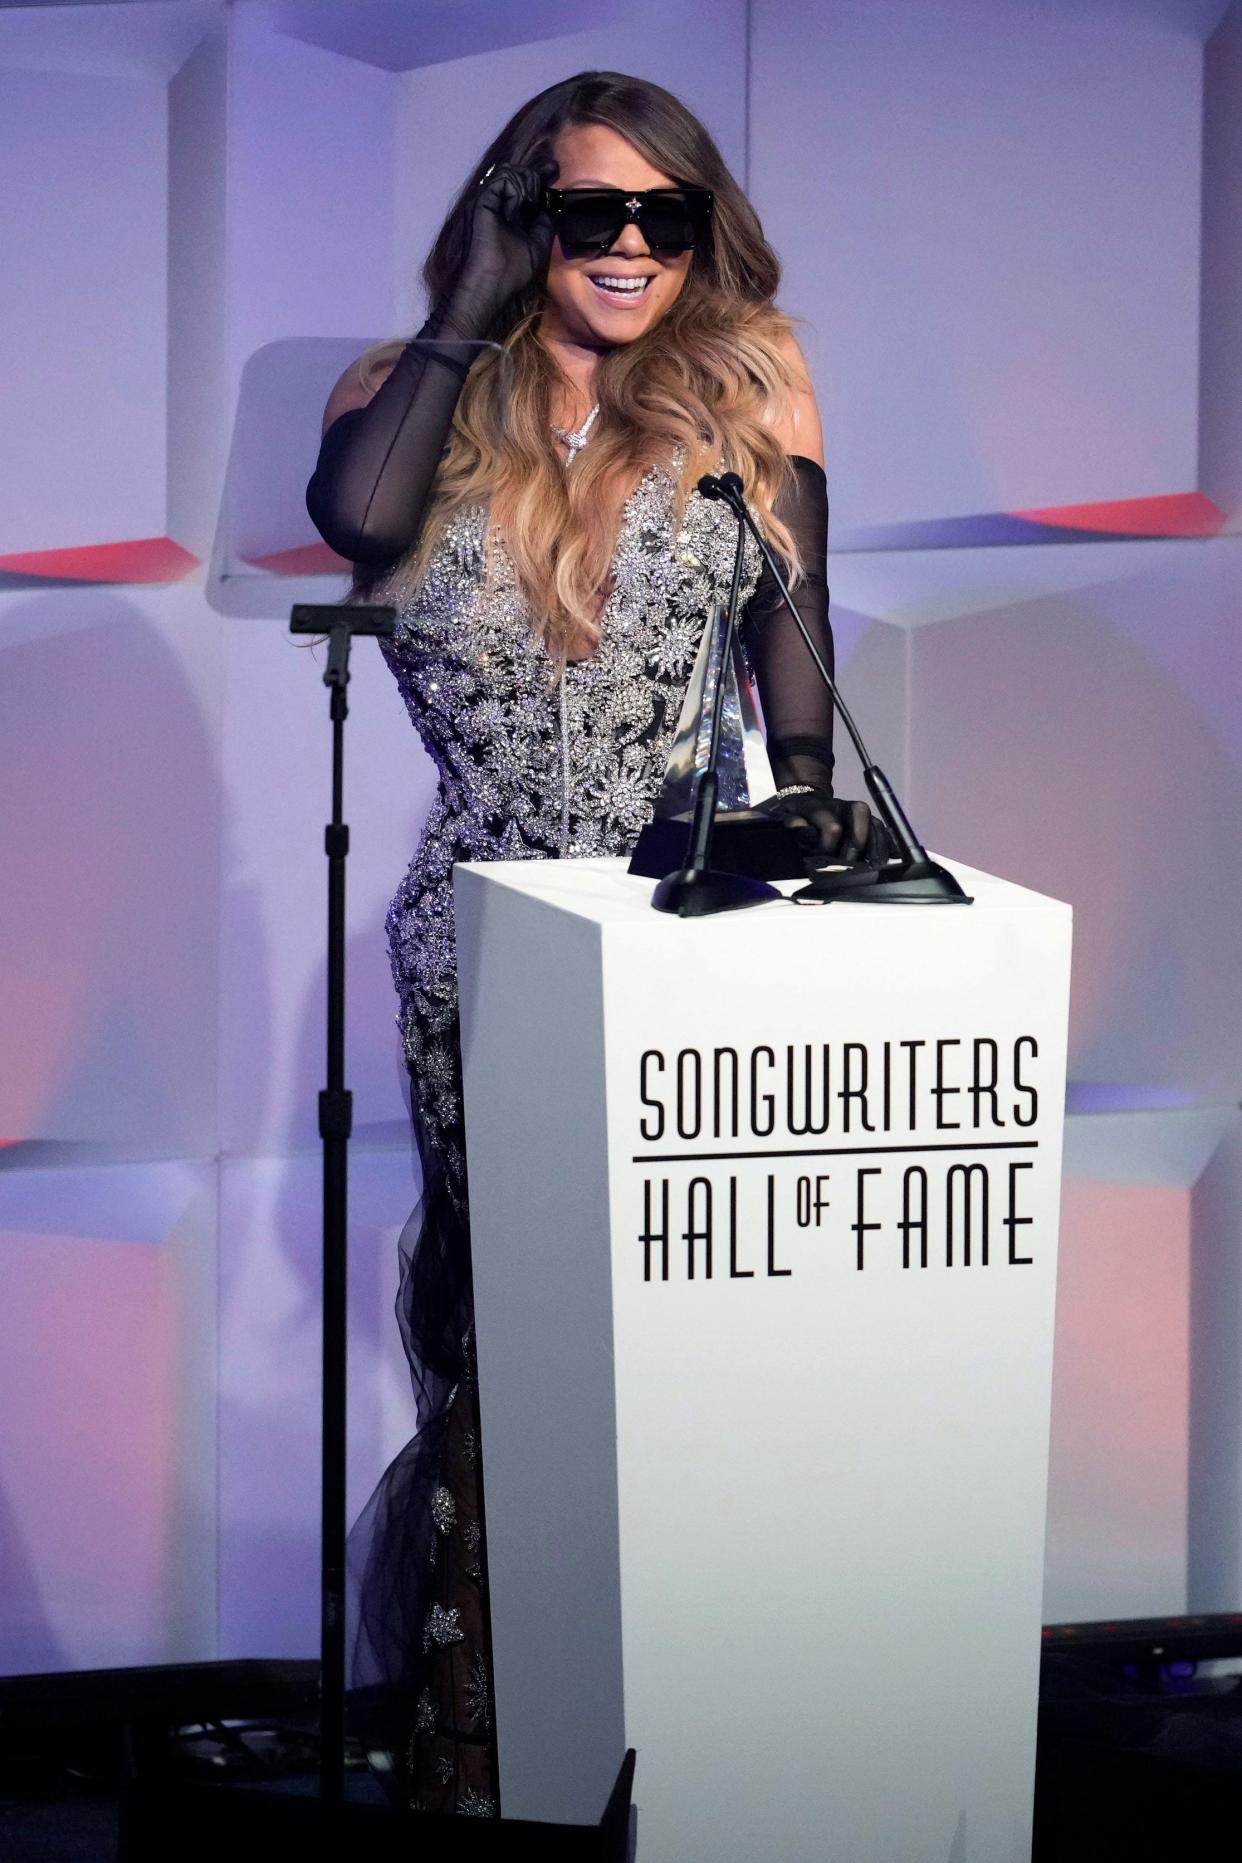 Mariah Carey's songwriting was honored at her 2022 induction into the Songwriters Hall of Fame in New York. The multi-platinum superstar known for her pop hits recently shared more details about the grunge-rock album she recorded in 1995.